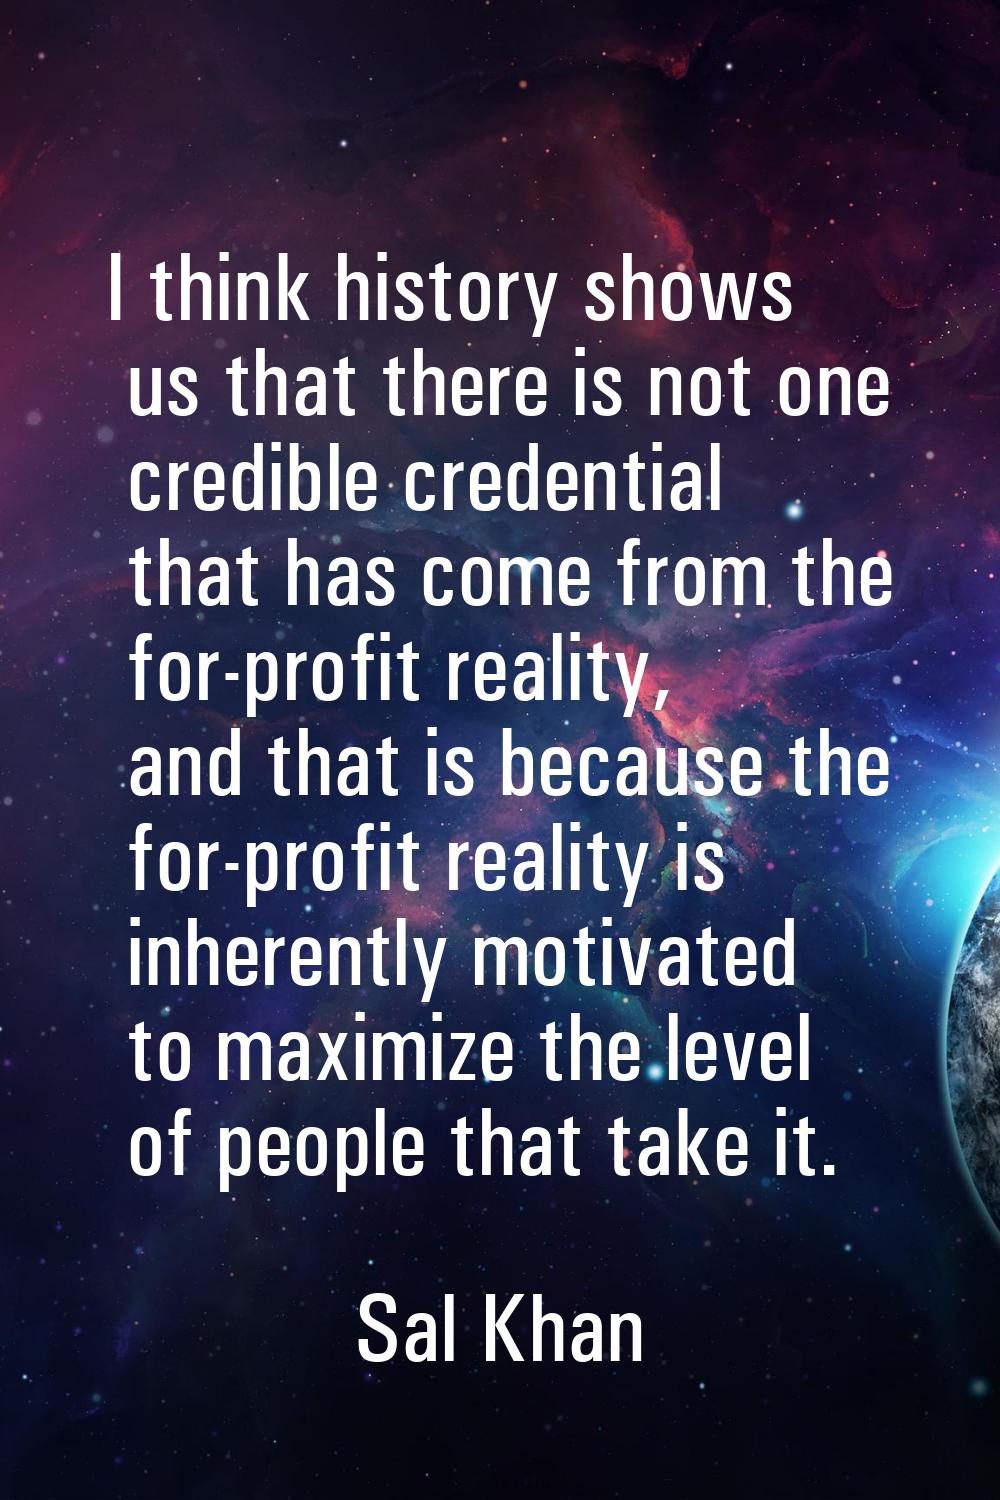 I think history shows us that there is not one credible credential that has come from the for-profi